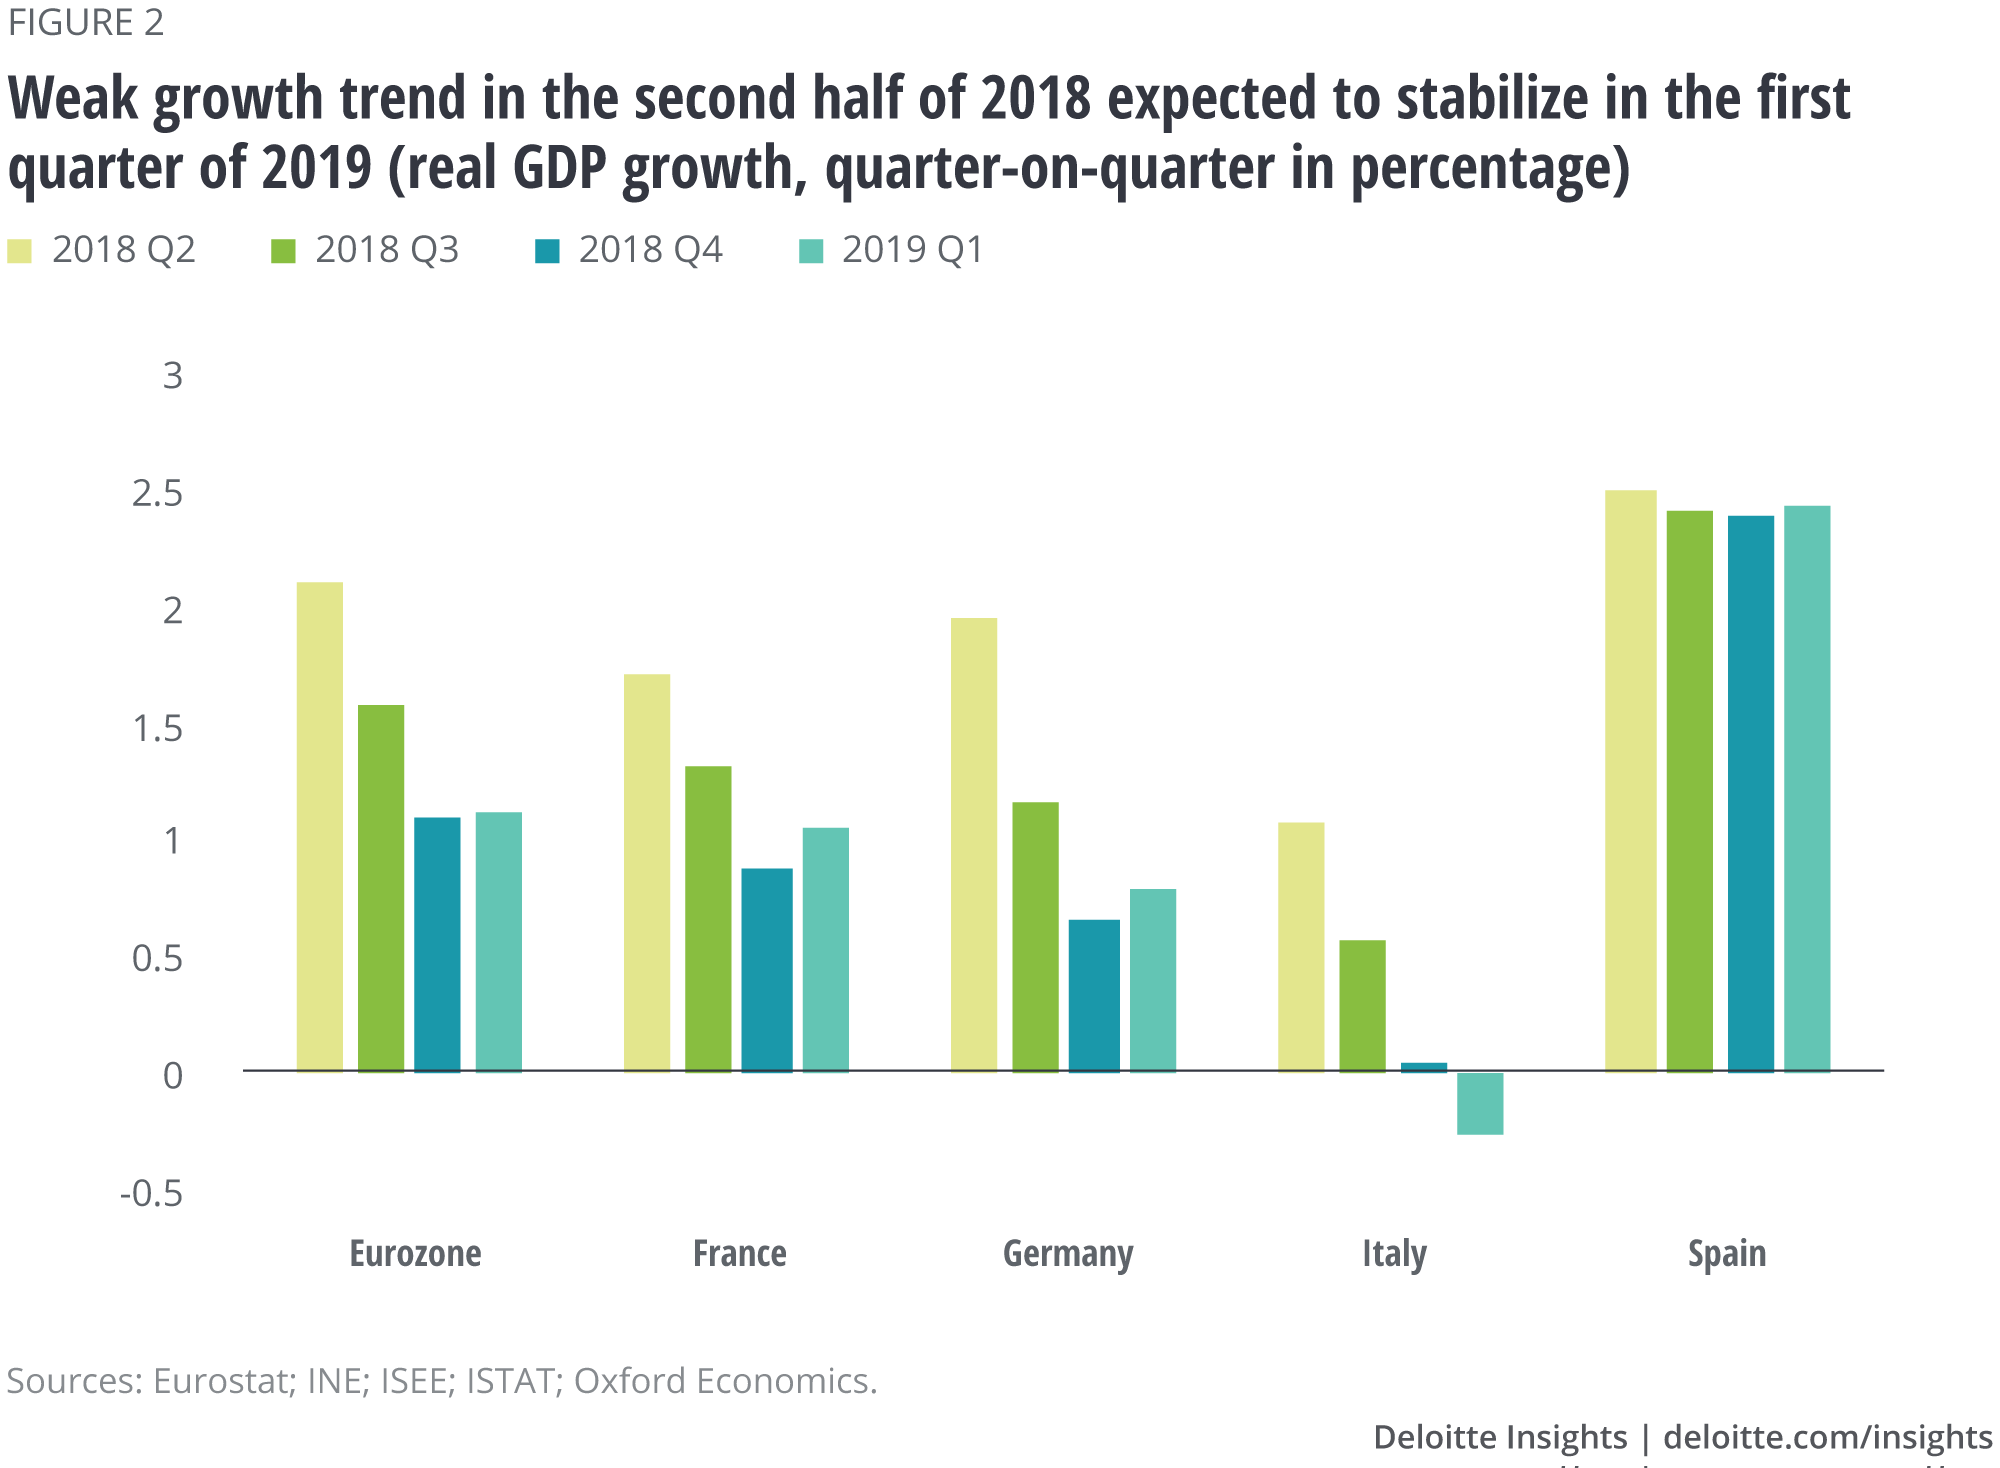 Weak growth trend in the second half of 2018 expected to stabilize in the first quarter of 2019 (real GDP growth, quarter-on-quarter in percentage)